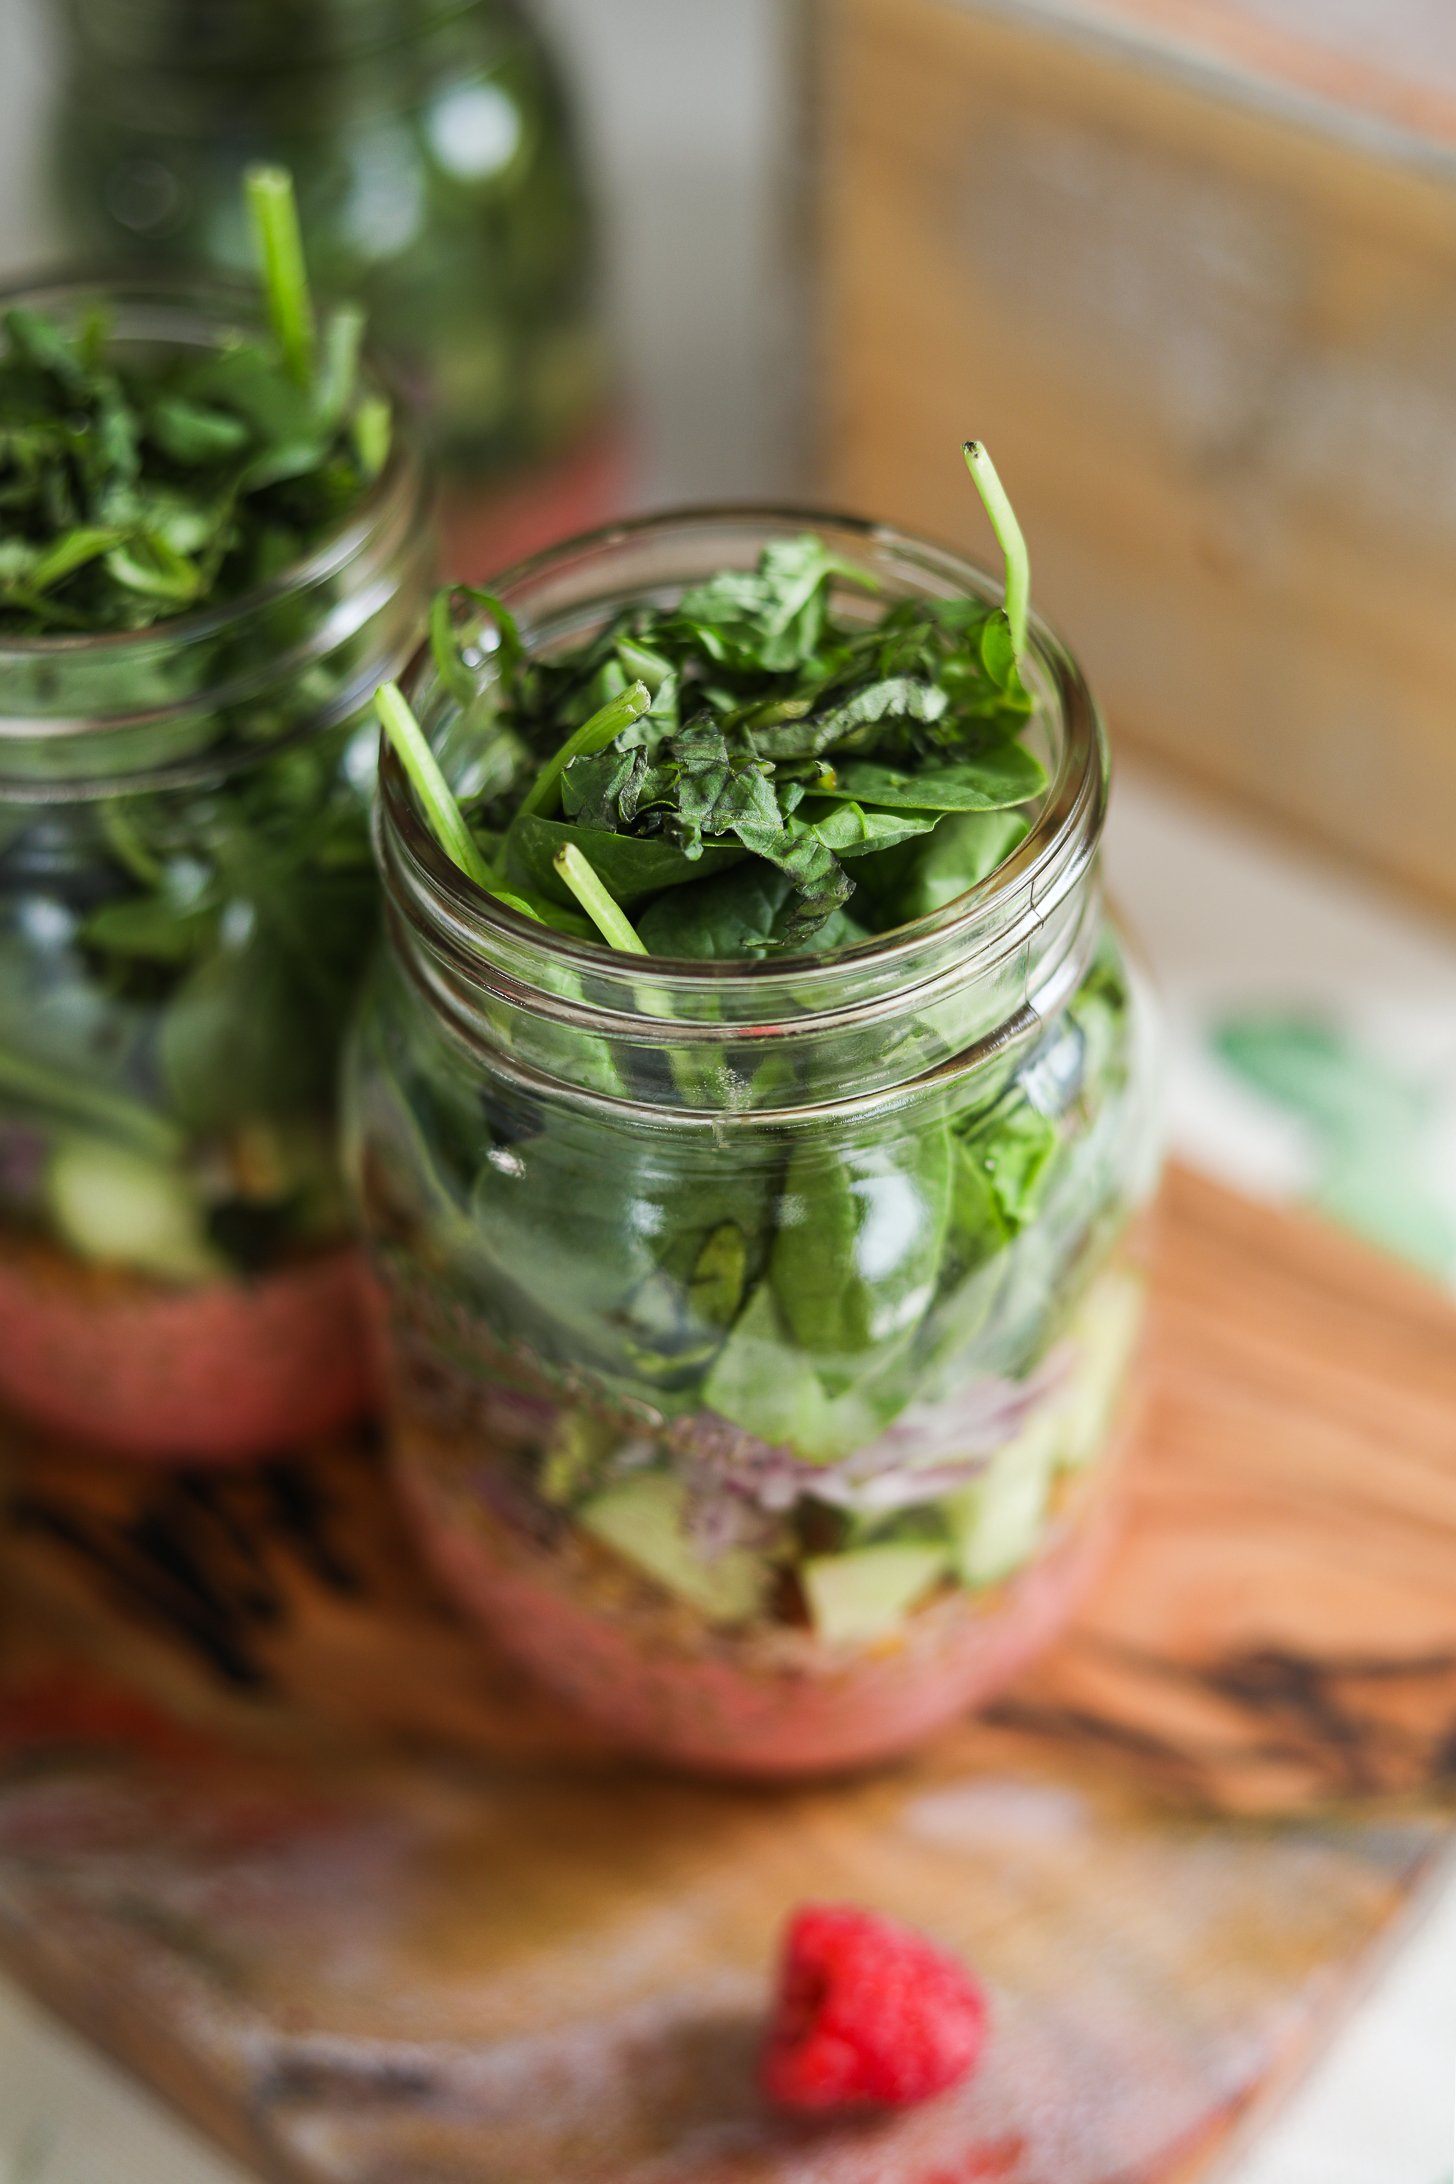 A perspective image of two mason jars containing a layered salad including a berry red dressing, spinach, cucumber and lentils.